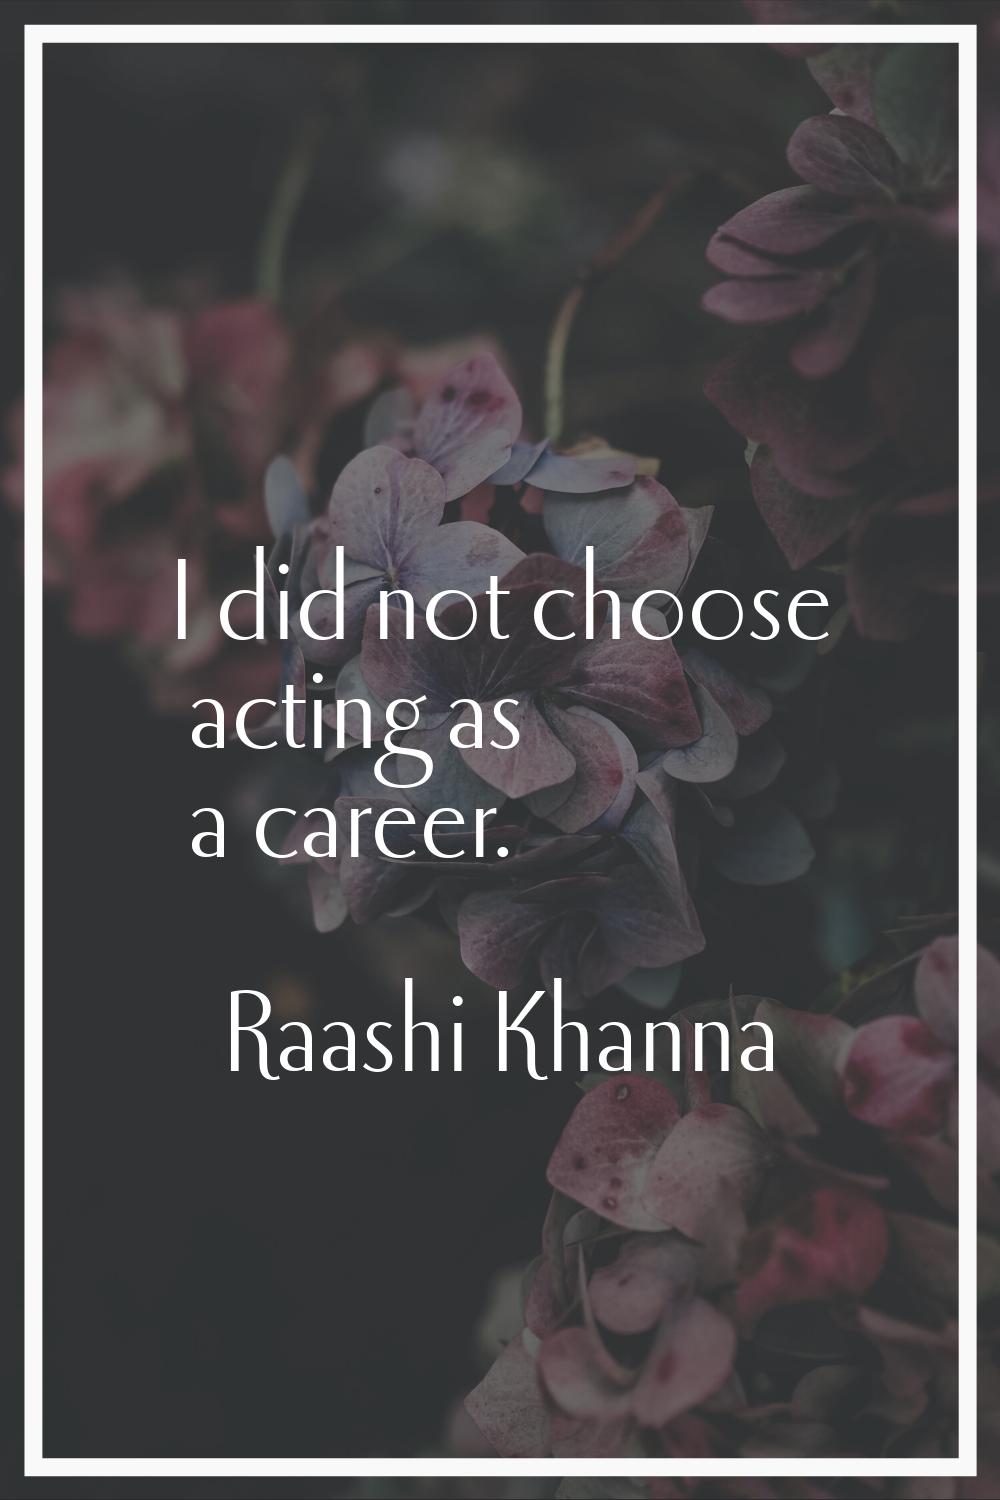 I did not choose acting as a career.